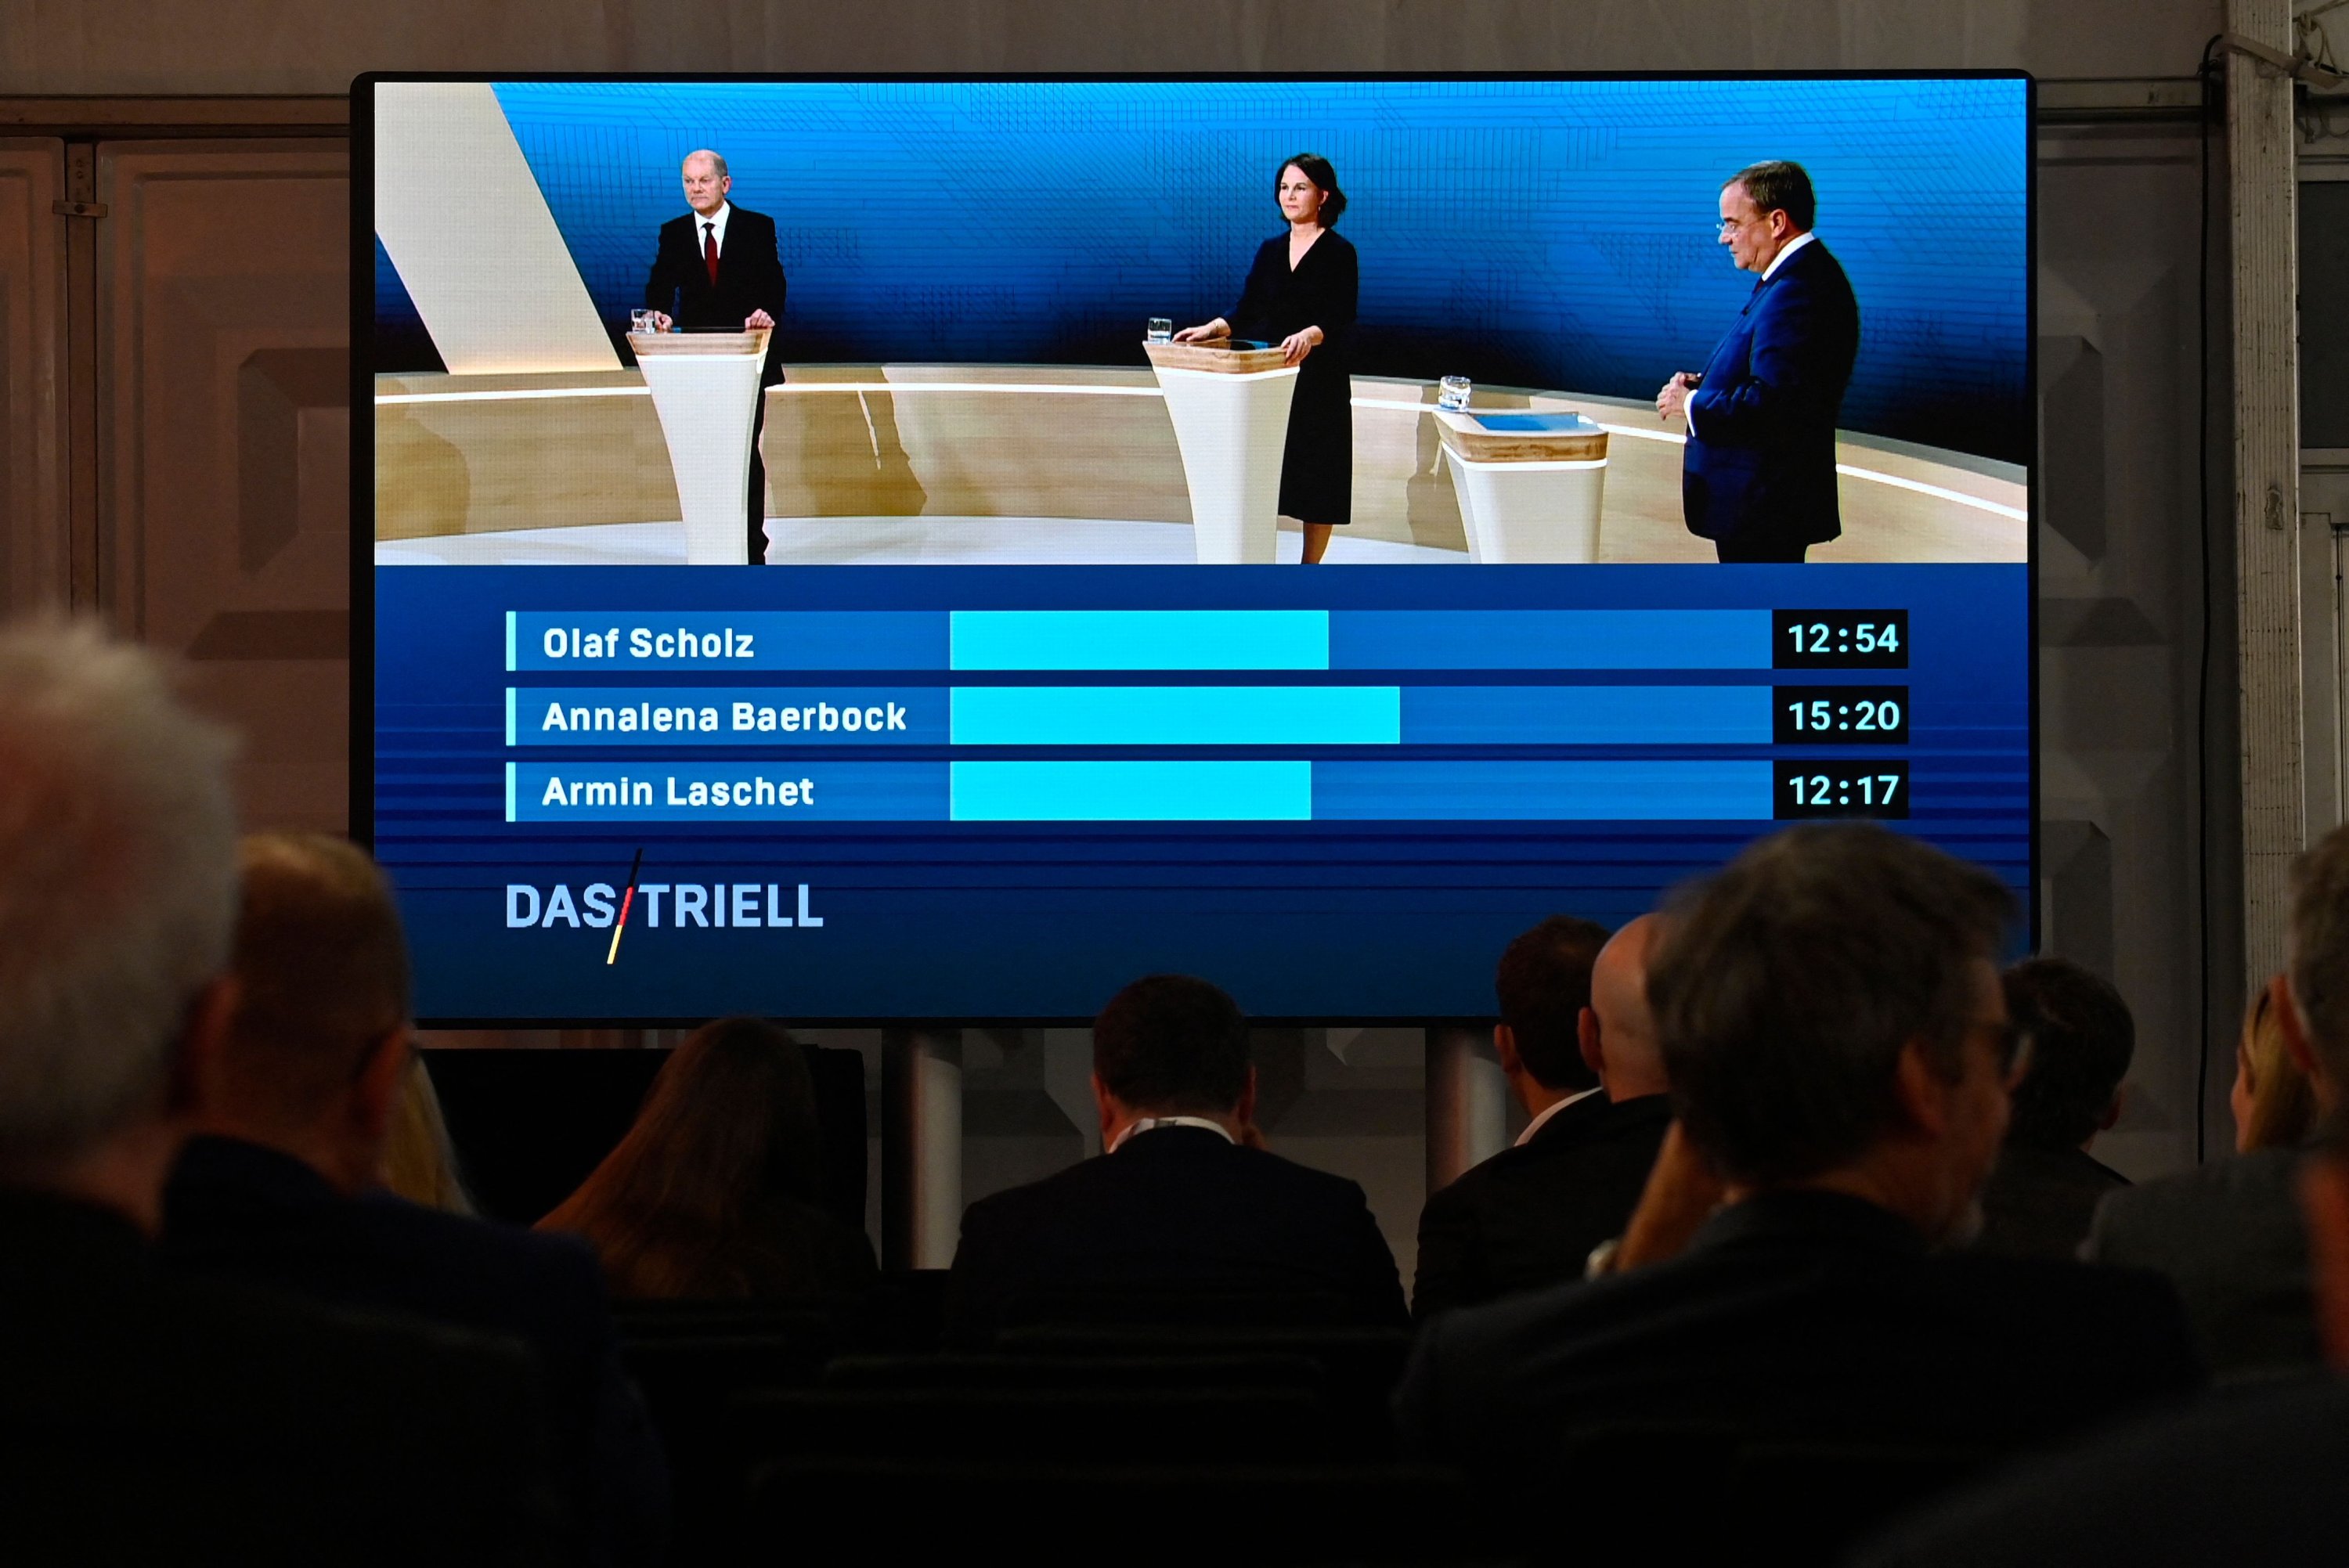 Journalists and party members watch a screen from the press center showing the amount of time used by chancellor candidates as they attend the main TV debate in Berlin, Germany, Sept. 12, 2021, ahead of general elections taking place on Sept. 26, 2021. (AFP Photo)